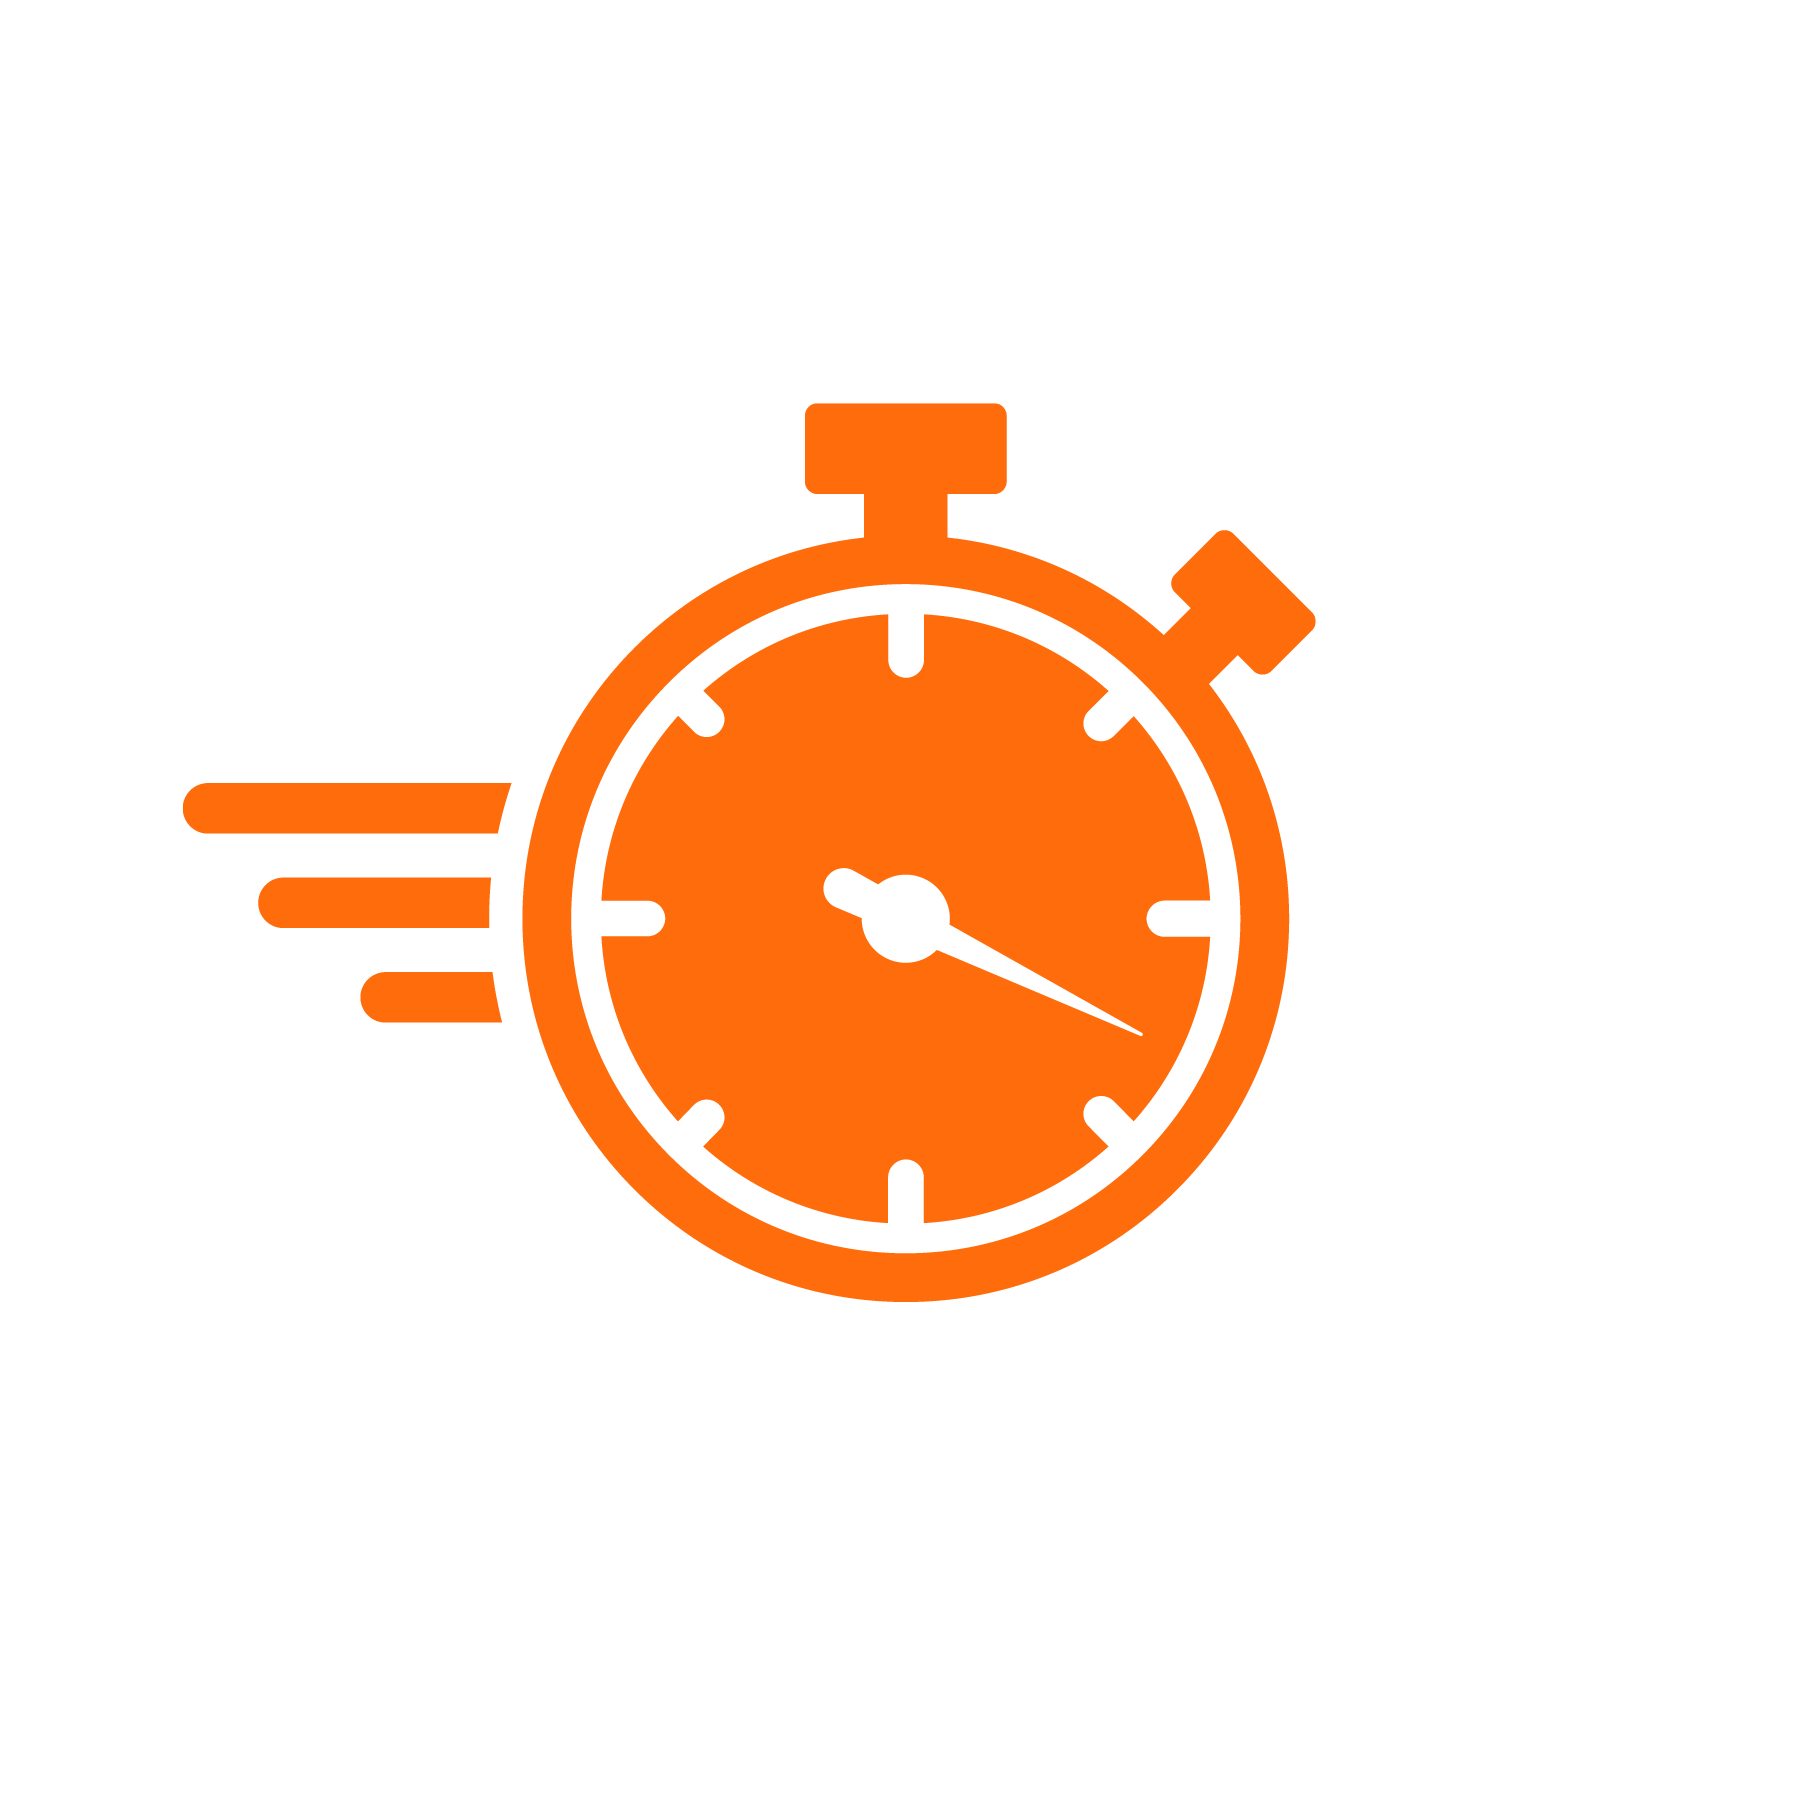 Orange stopwatch icon with lines suggesting motion right